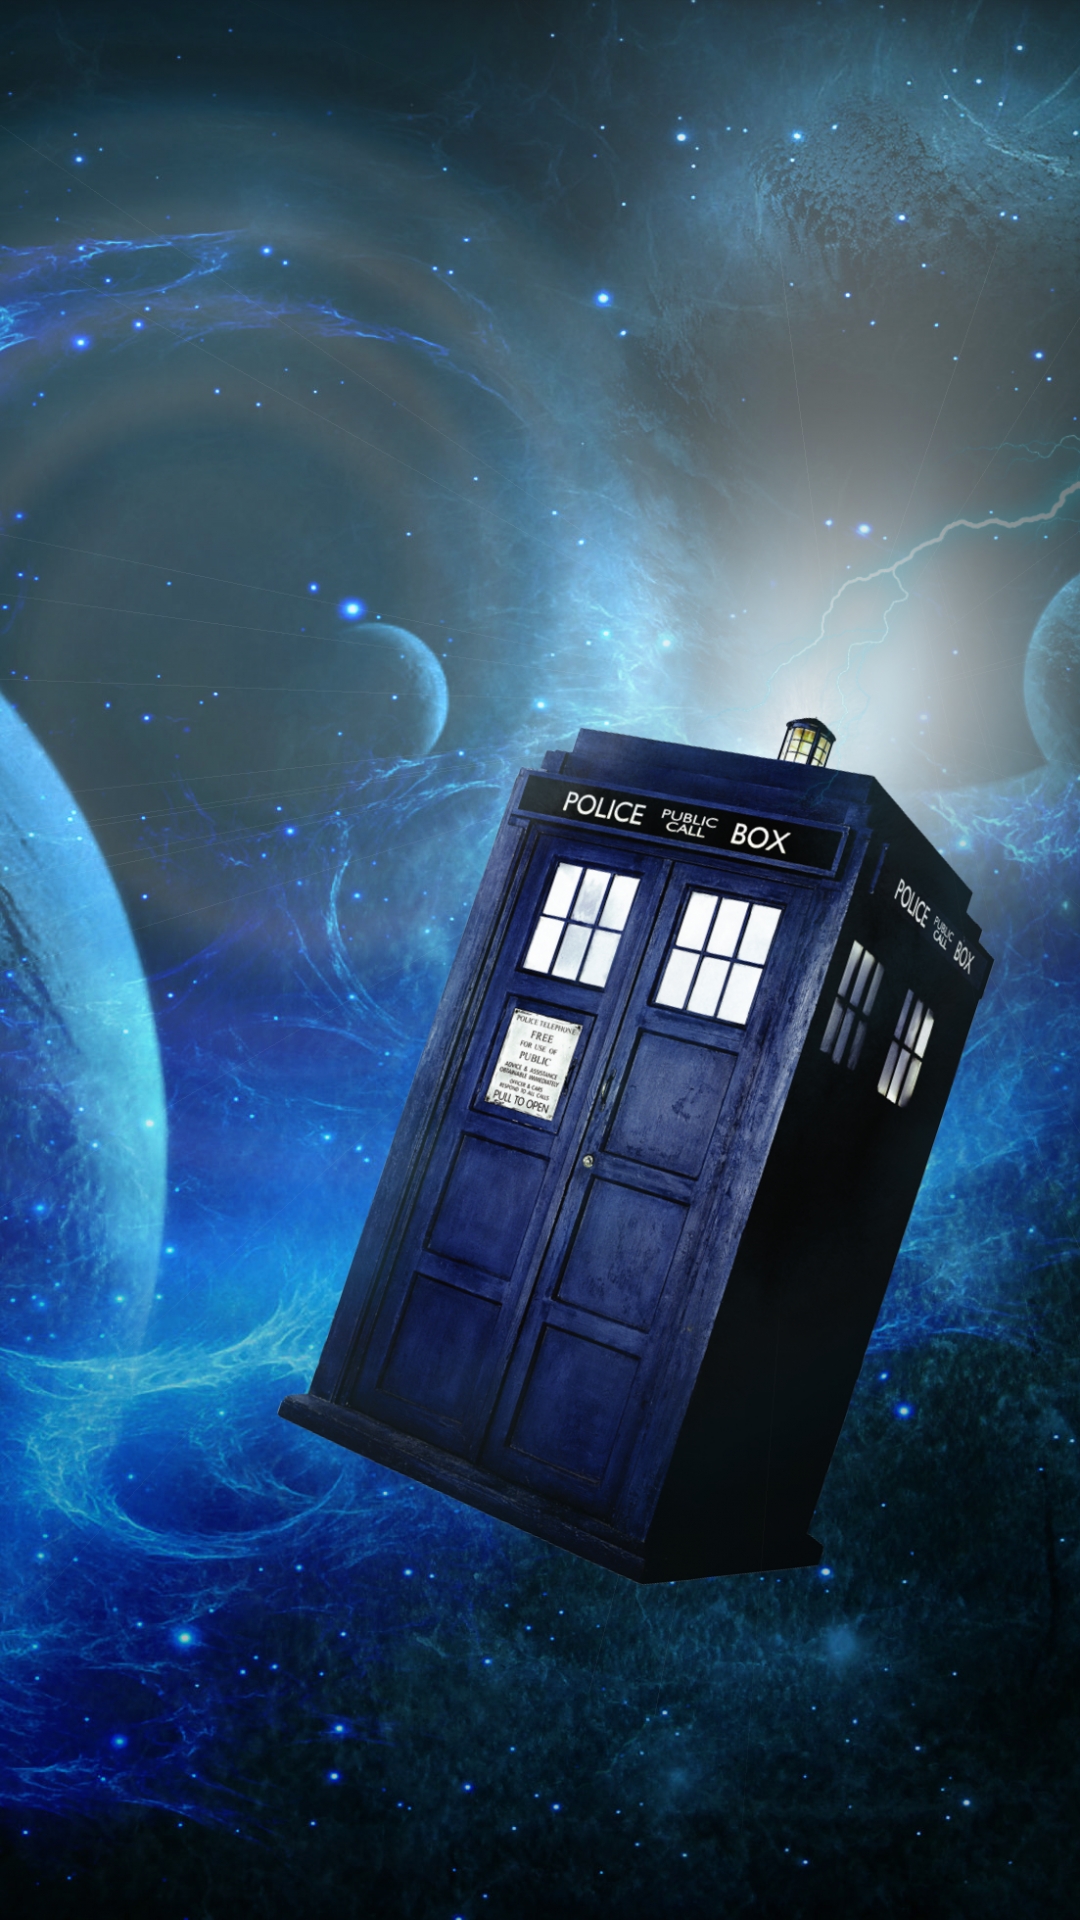 10 Latest Dr Who Phone Wallpaper FULL HD 1080p For PC ...